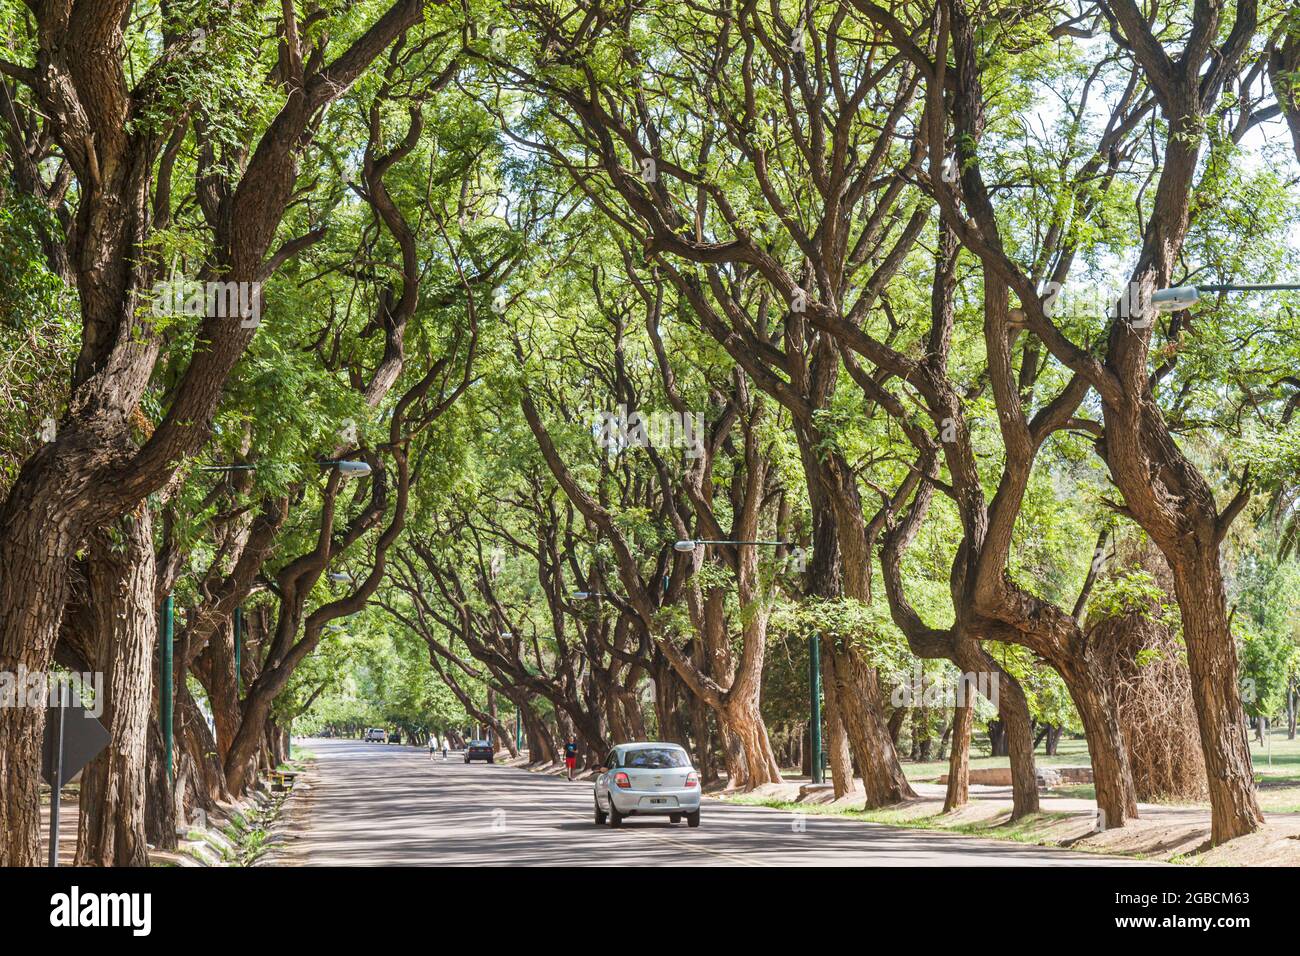 Argentina Mendoza Parque General San Martin public park,tree lined road street scene,Tipuana tipu Rosewood branches canopy, Stock Photo